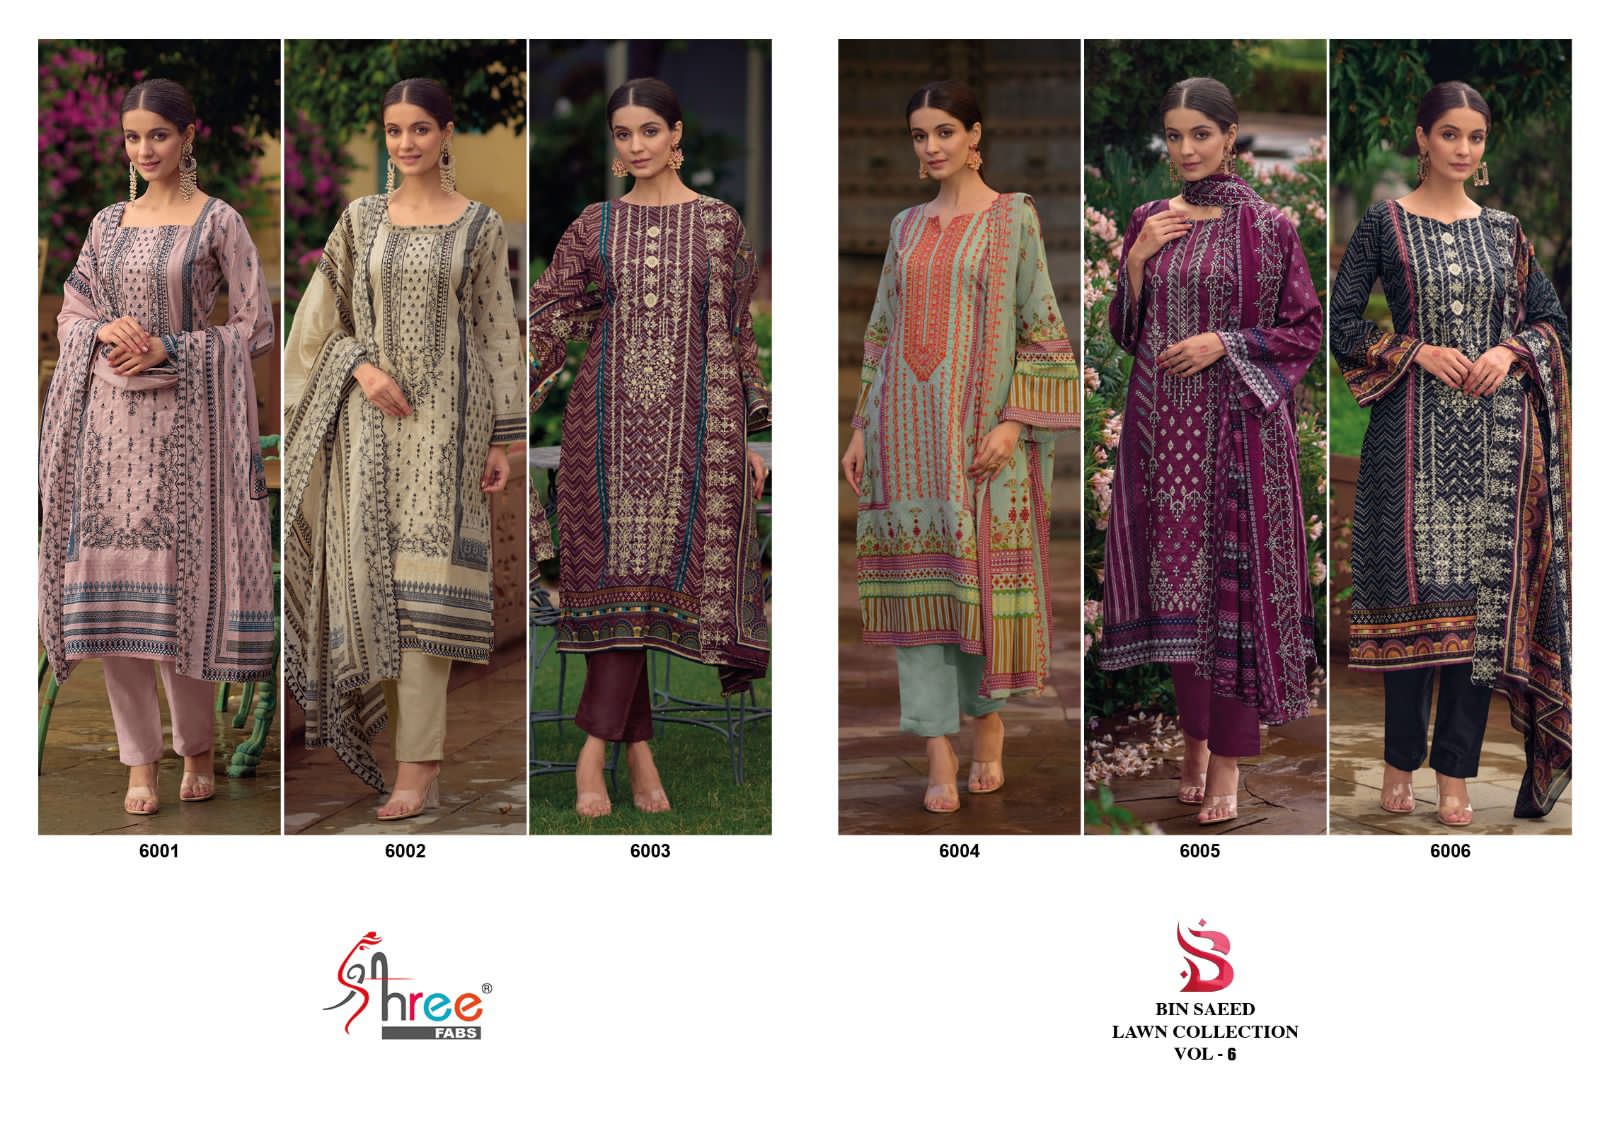 Shree Fab Bin Saeed Lawn Collection Vol 6 collection 7